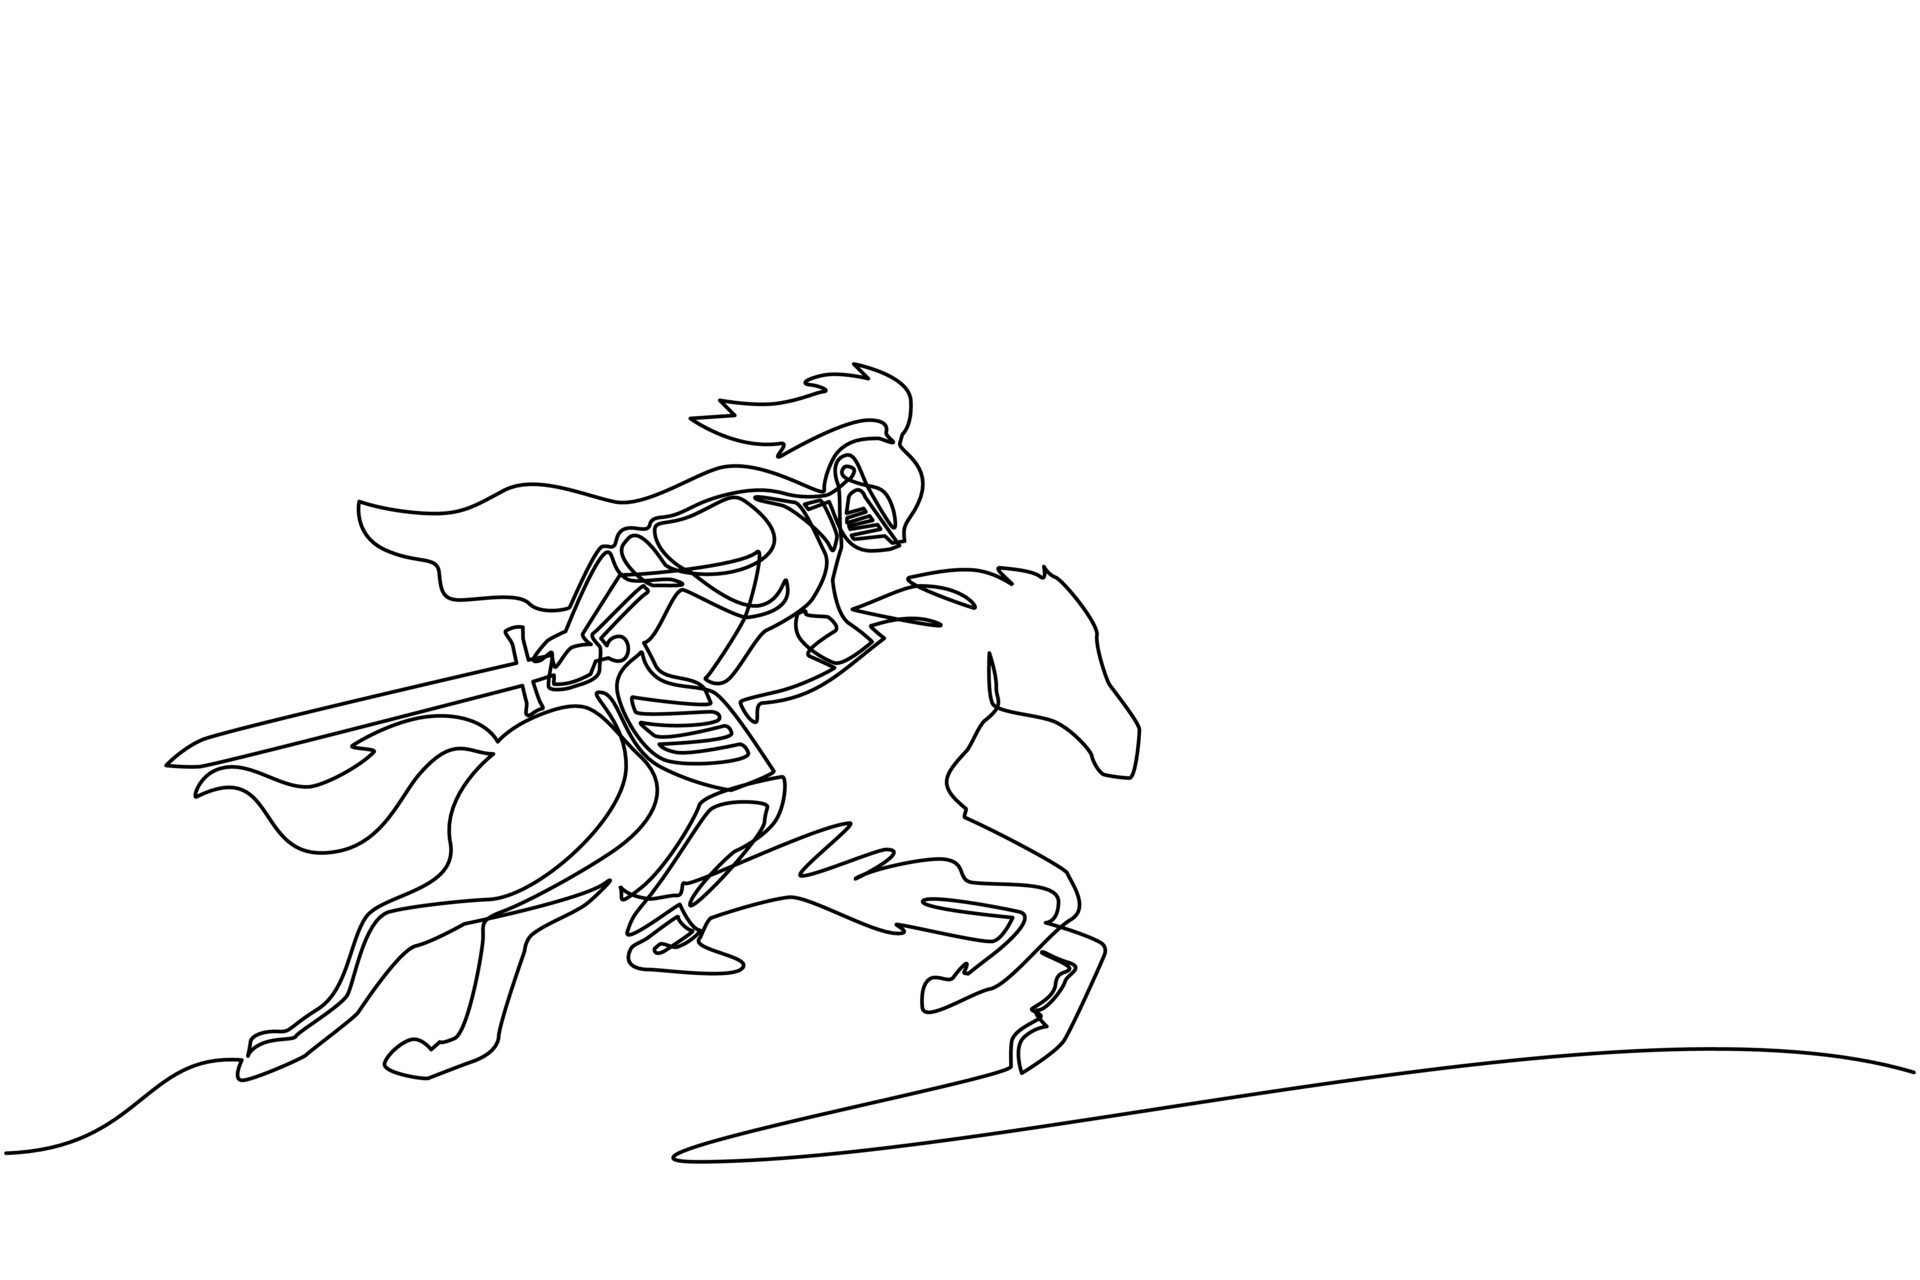 Knight on Horse  pen art  Knight drawing Knight on horse Armor drawing